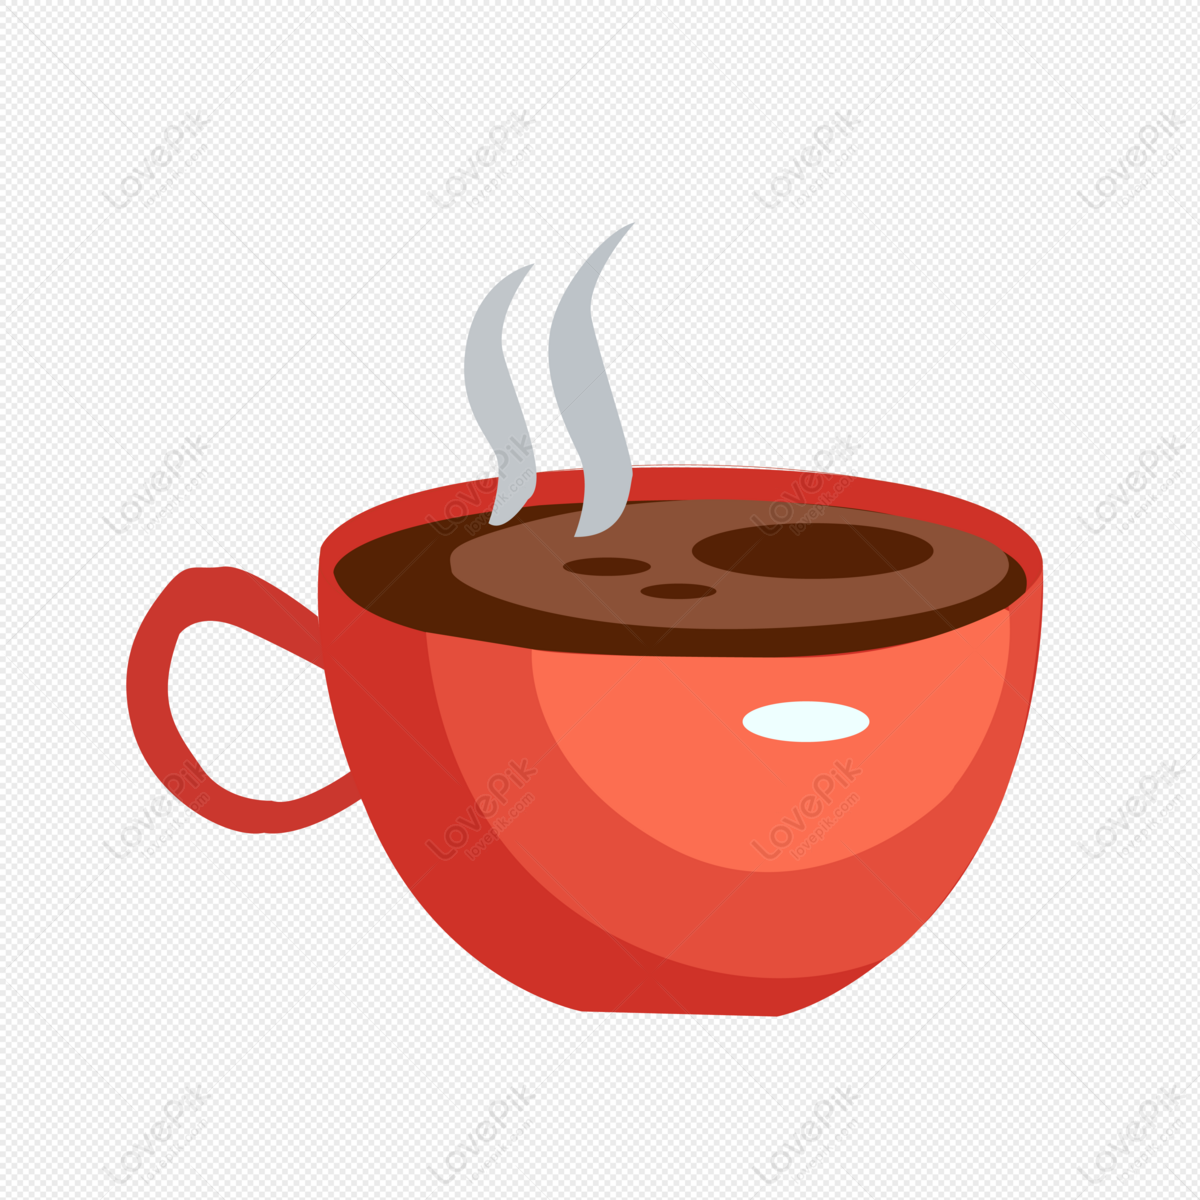 A Cup Of Coffee PNG Transparent Background And Clipart Image For Free  Download - Lovepik | 401709630